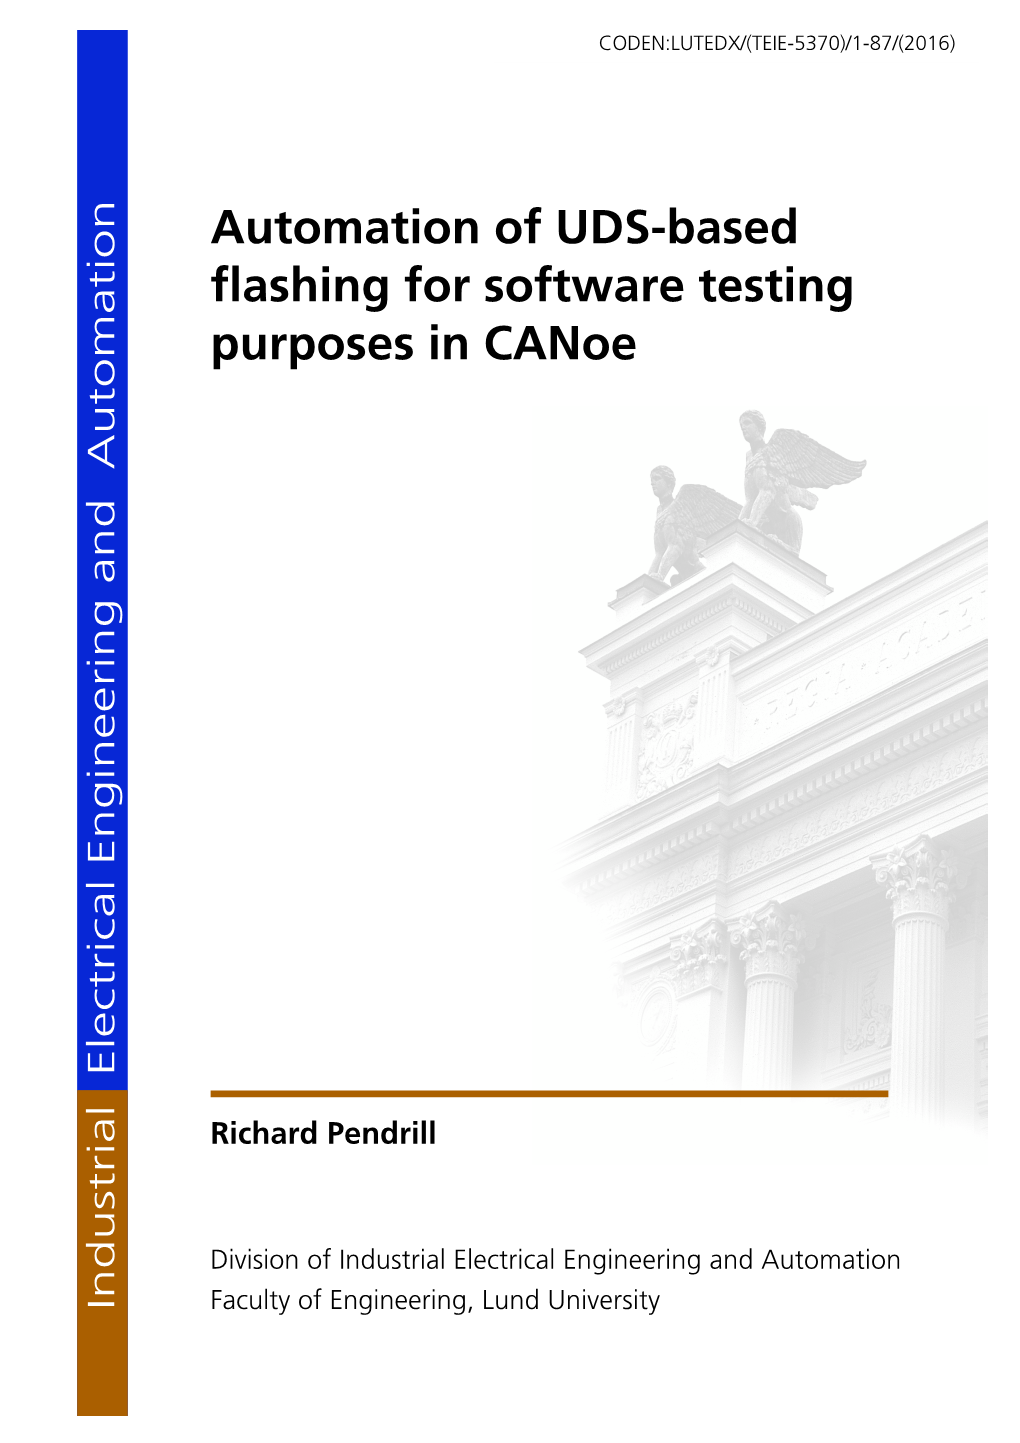 Automation of UDS-Based Flashing for Software Testing Purposes in Canoe